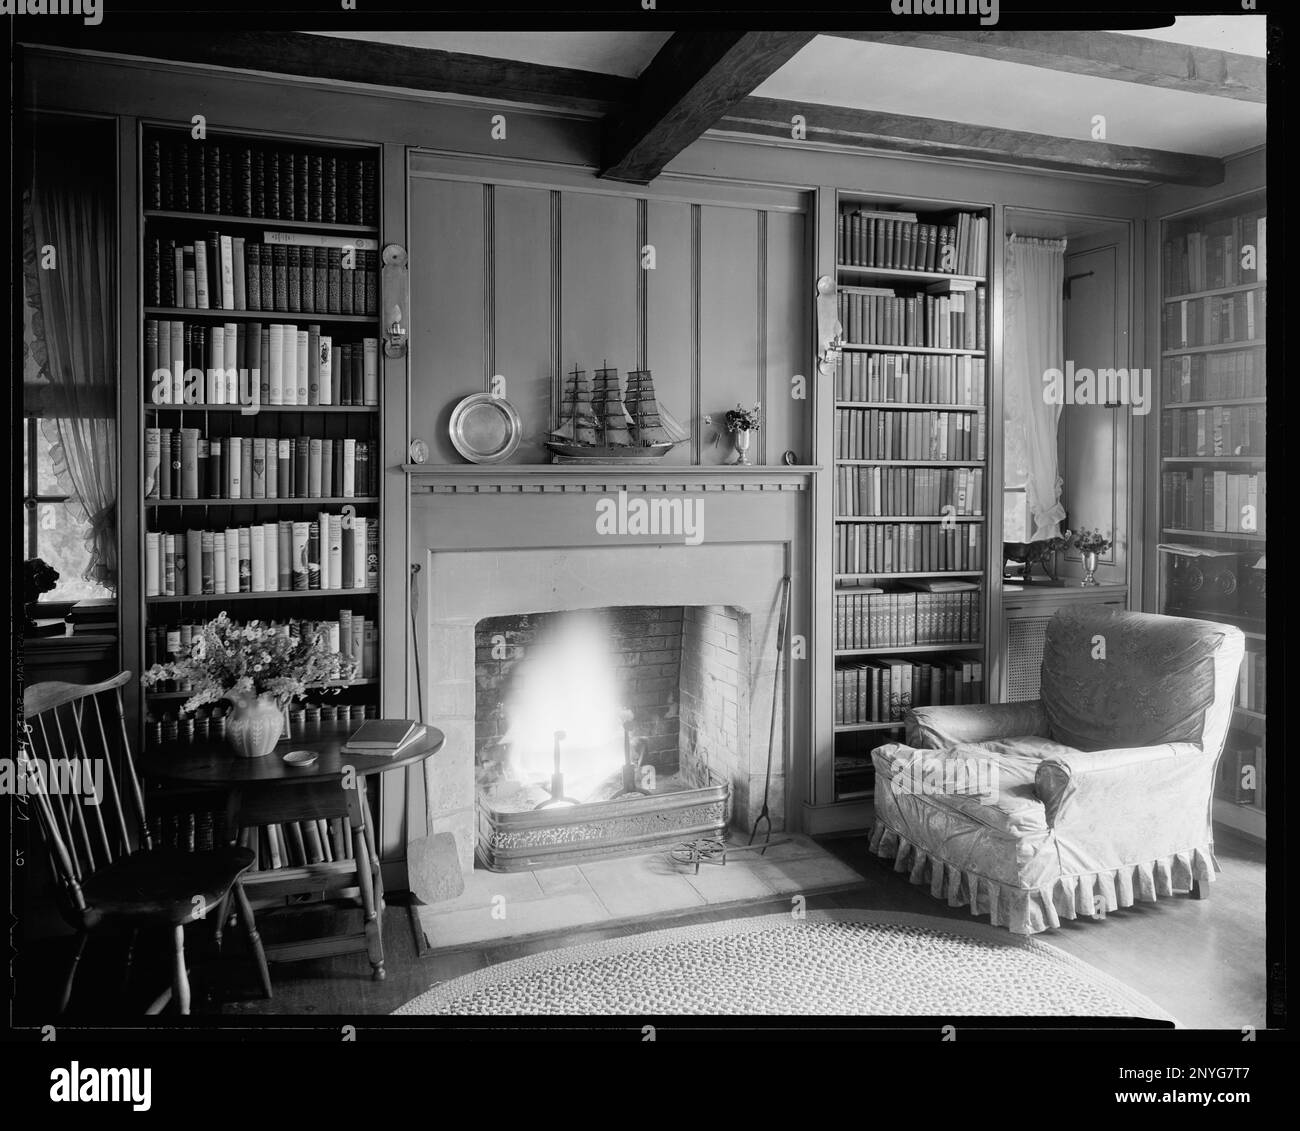 Trigg House, Richmond, Henrico County, Virginia. Carnegie Survey of the Architecture of the South. United States  Virginia  Henrico County  Richmond, Chairs, Bookcases, Mantels, Fireplaces, Paneling, Interiors. Stock Photo